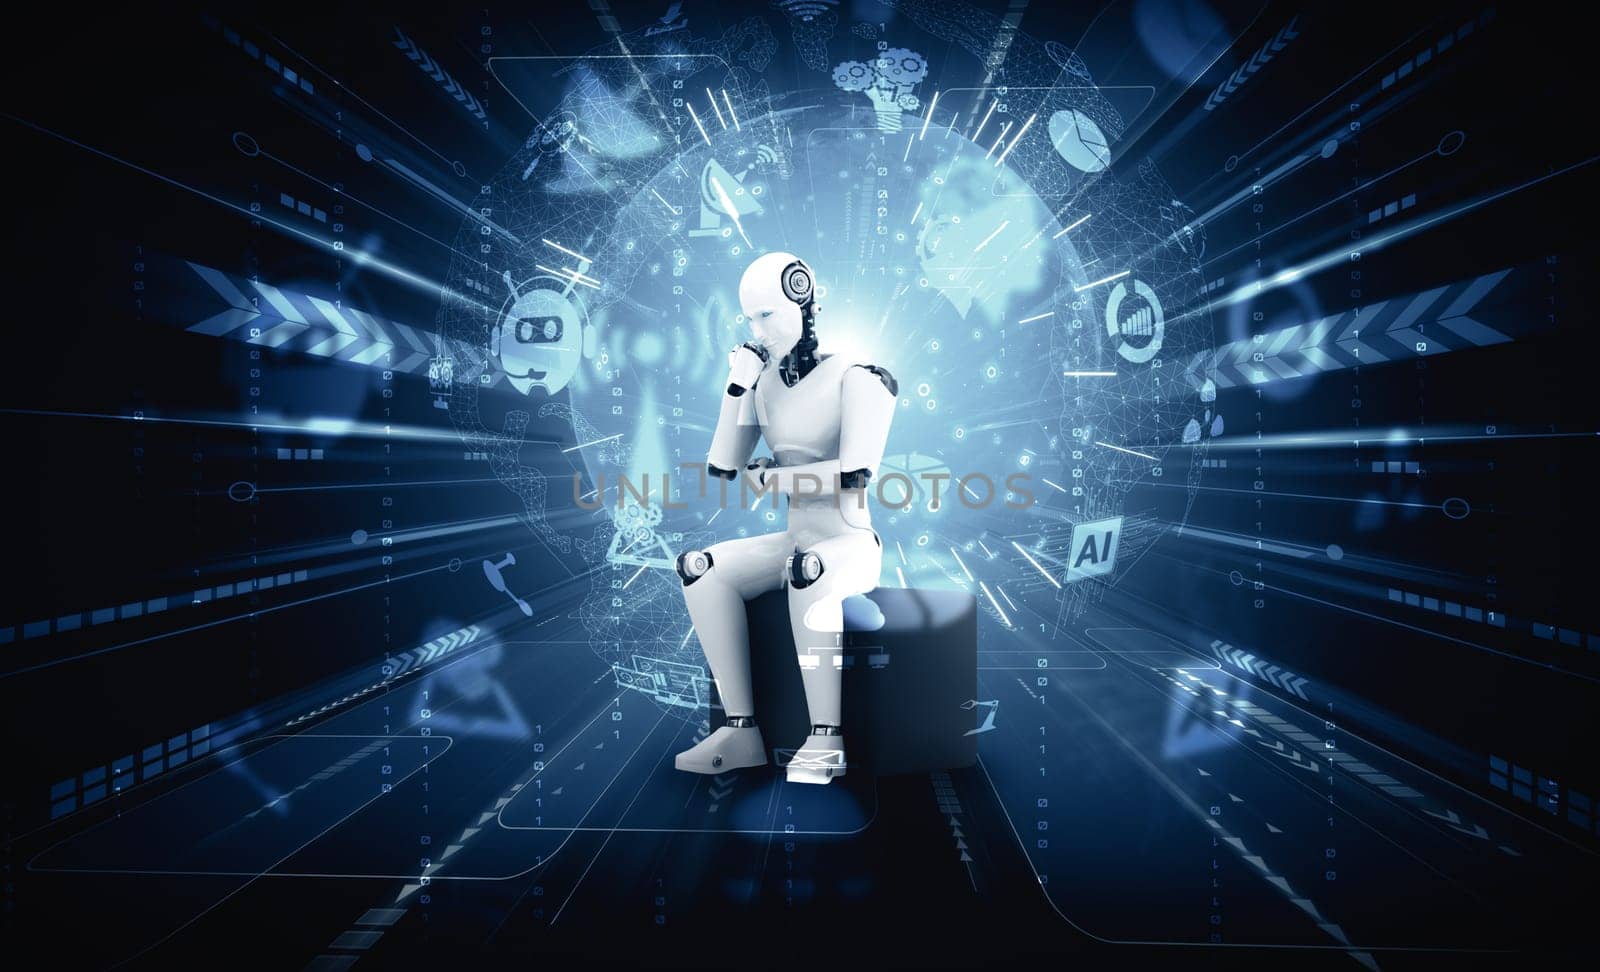 XAI 3d illustration Thinking AI humanoid robot analyzing hologram screen shows concept of network global communication using artificial intelligence by machine learning process. 3D illustration computer graphic.